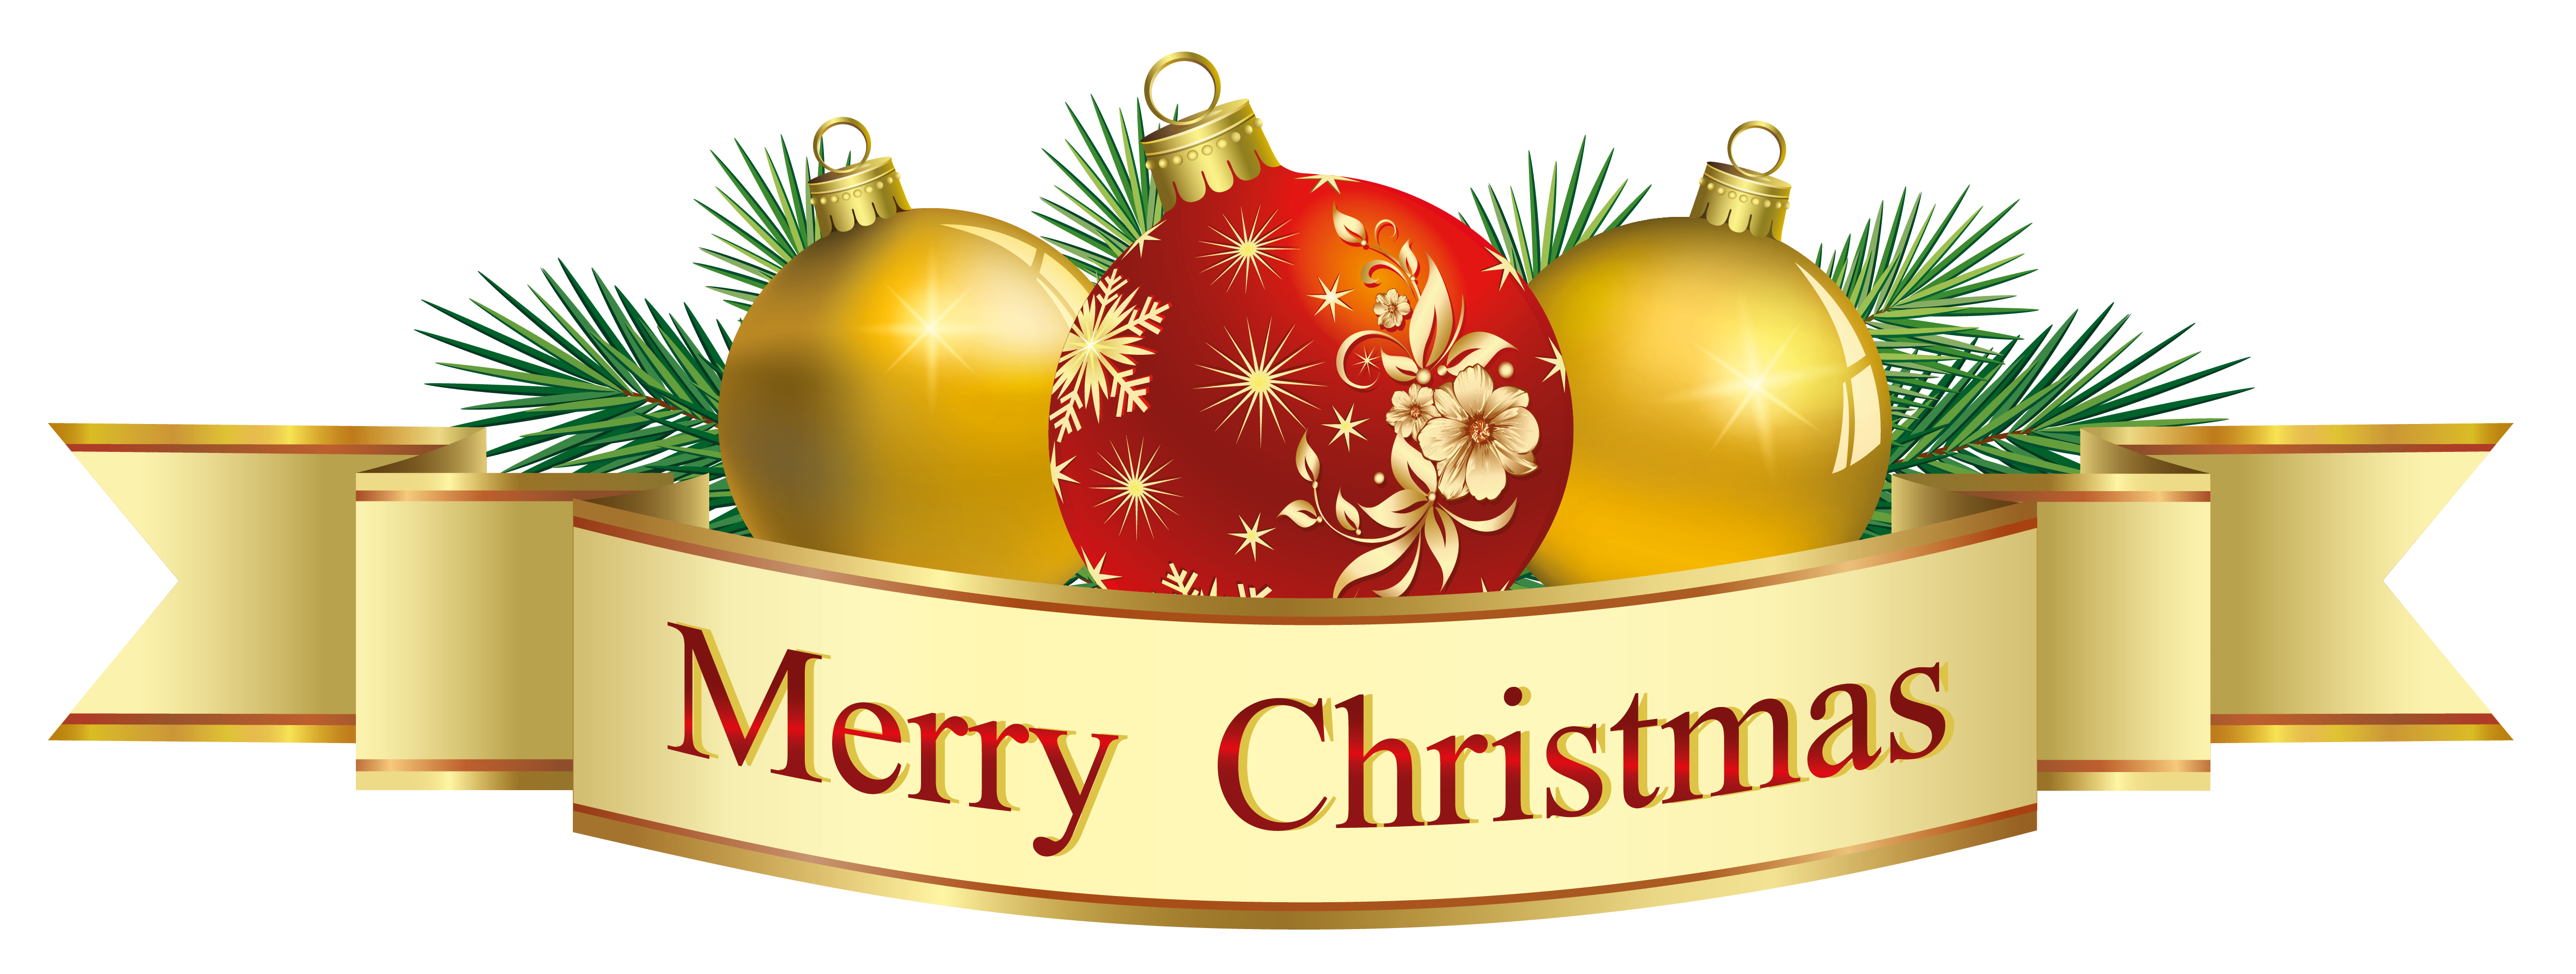 Merry Christmas Clip Art Images1 Klein School Cliparting